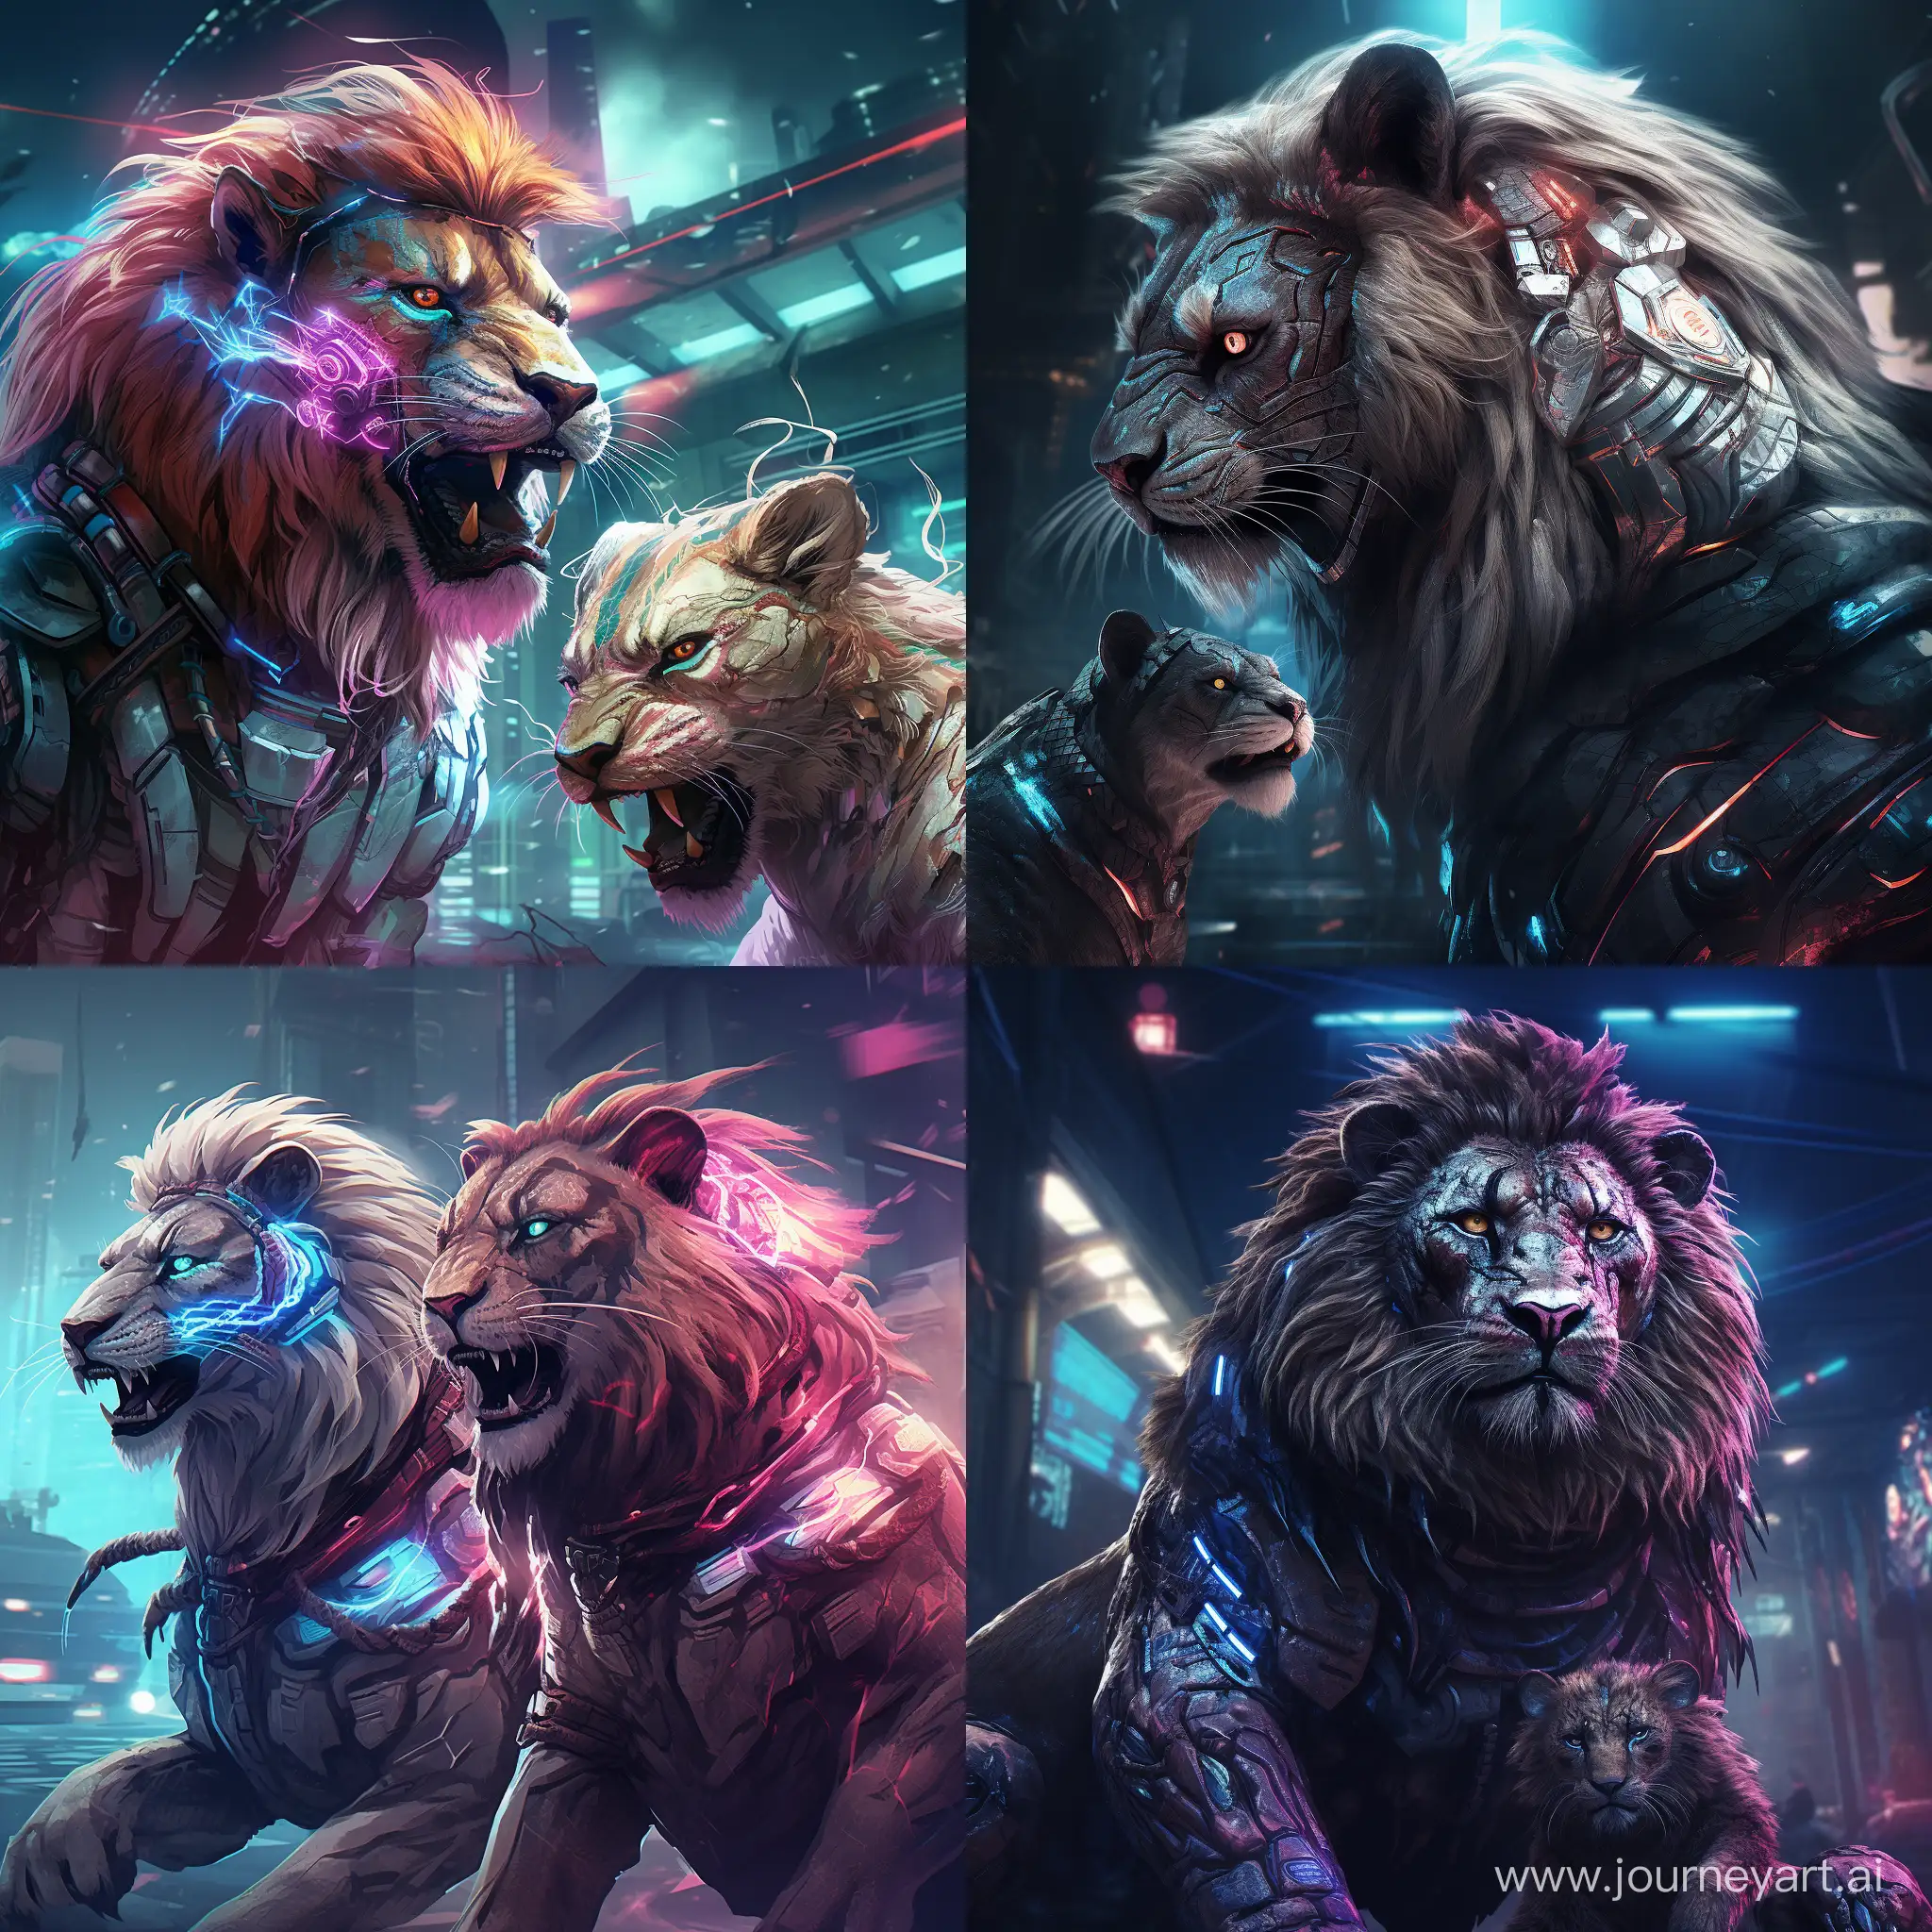 cat fights with lion in cyberpunk style